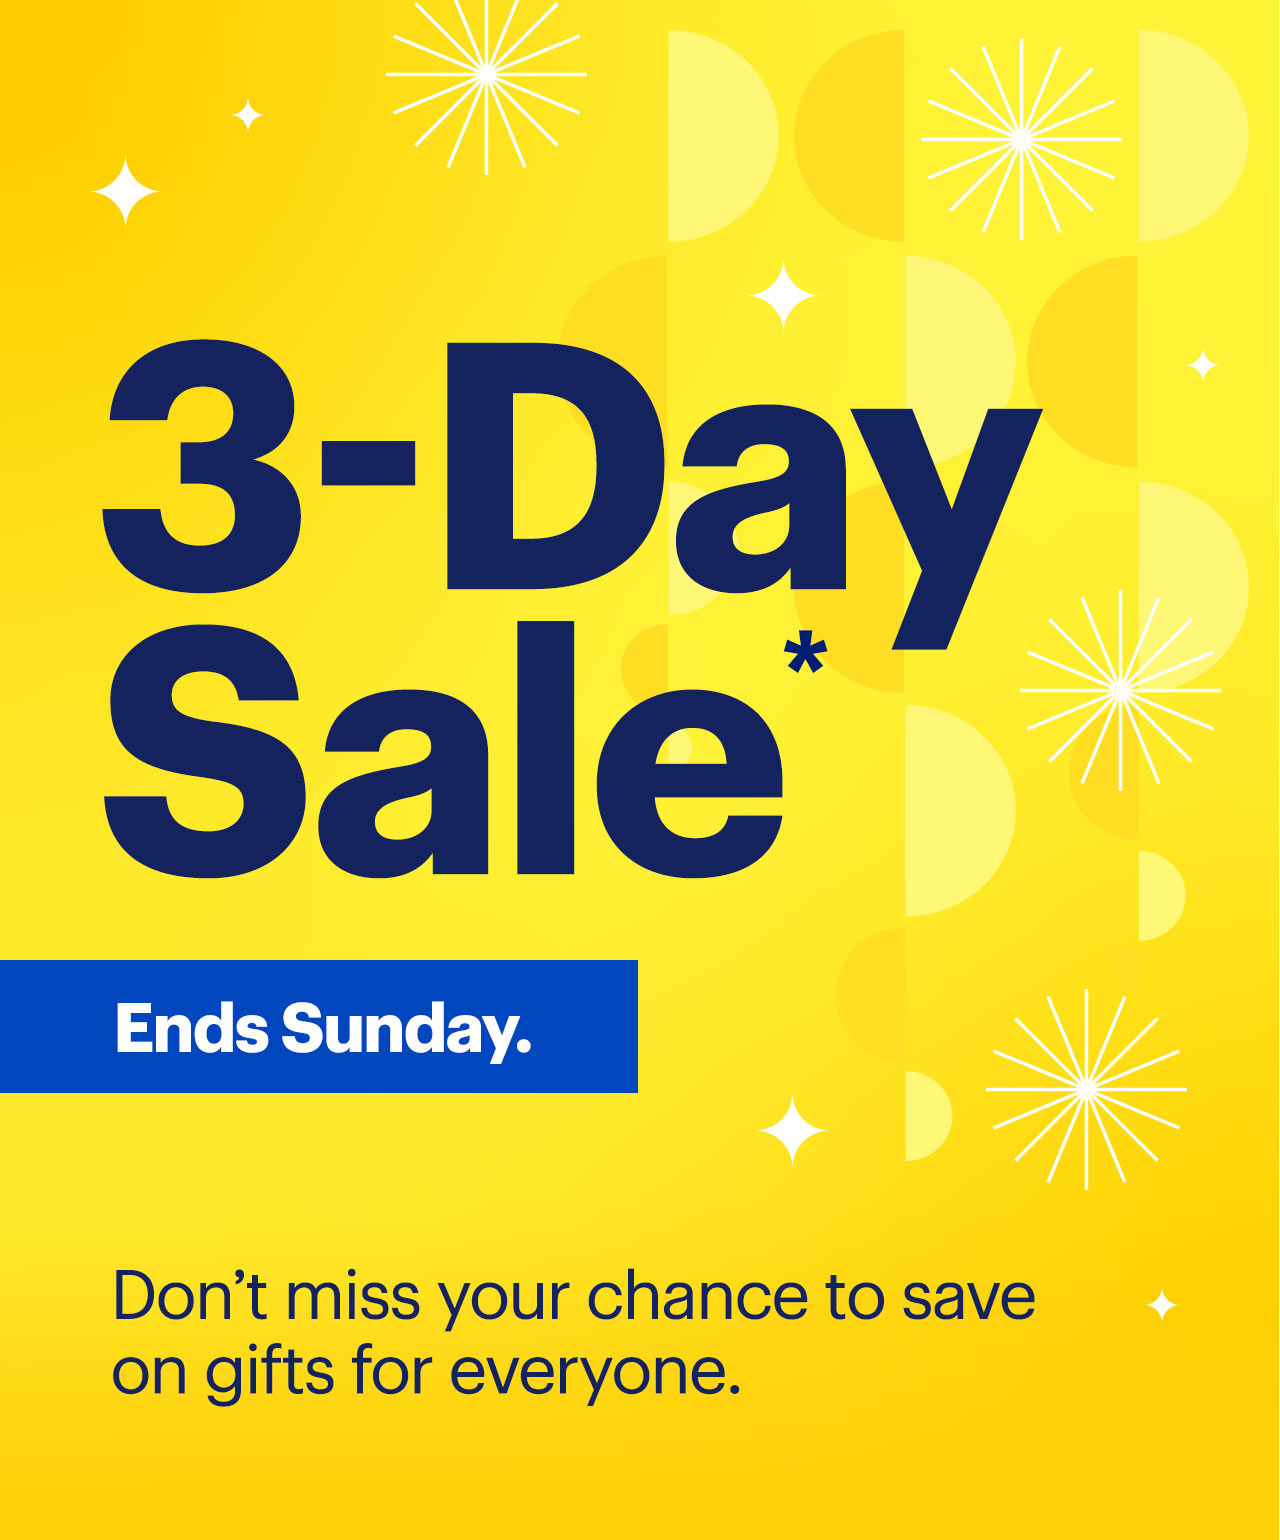 3-Day Sale ends Sunday. Don't miss your chance to save on gifts for everyone. Reference disclaimer.